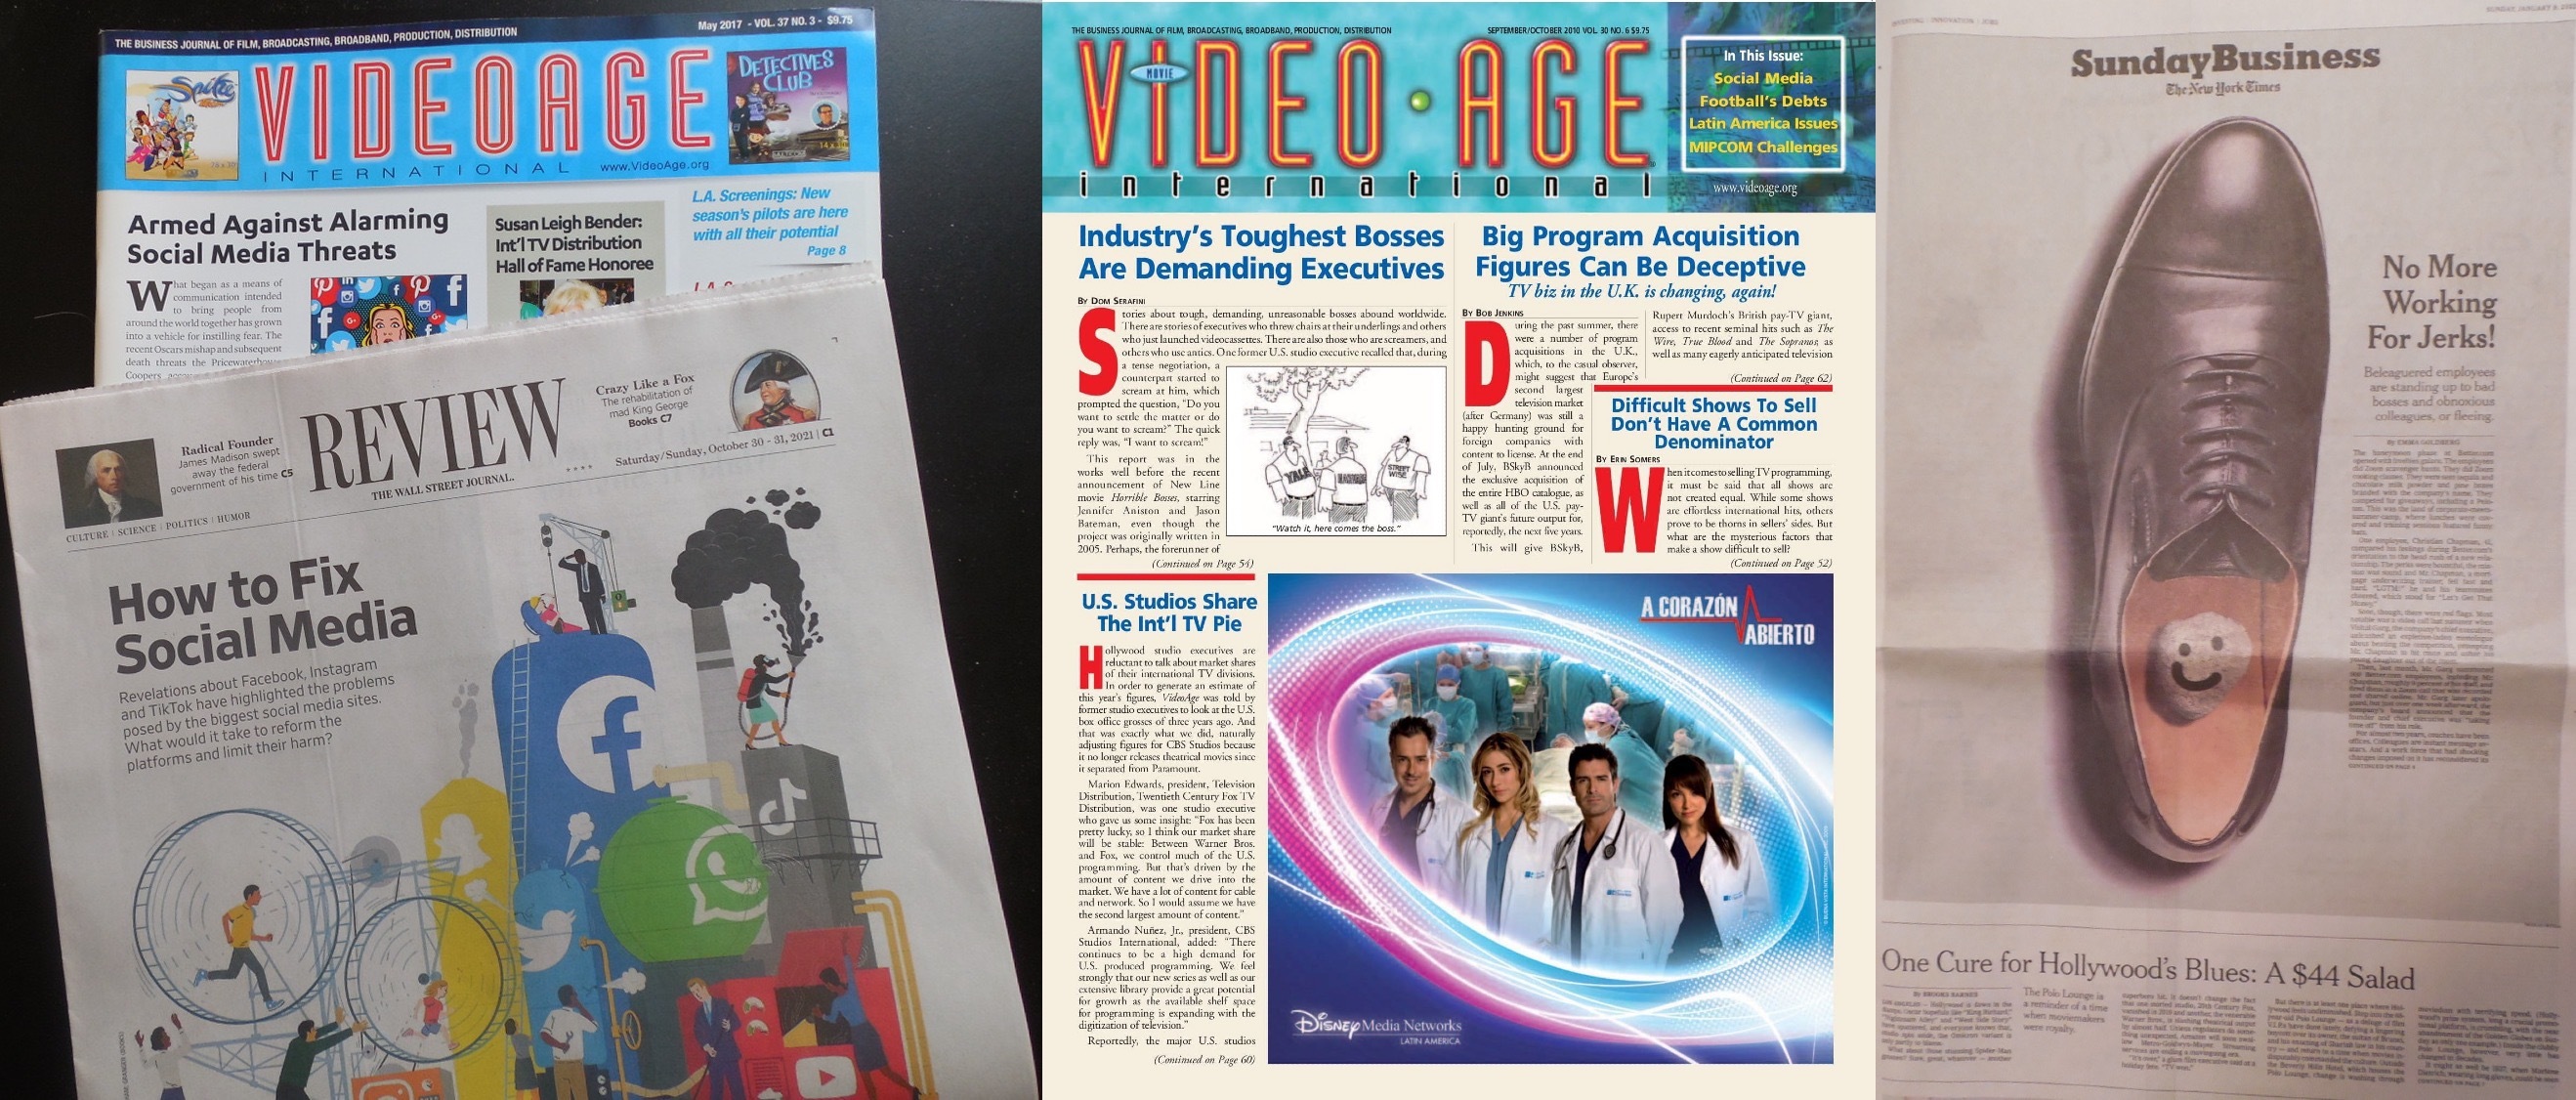 Ahead Of Its Times And Journal Videoage International